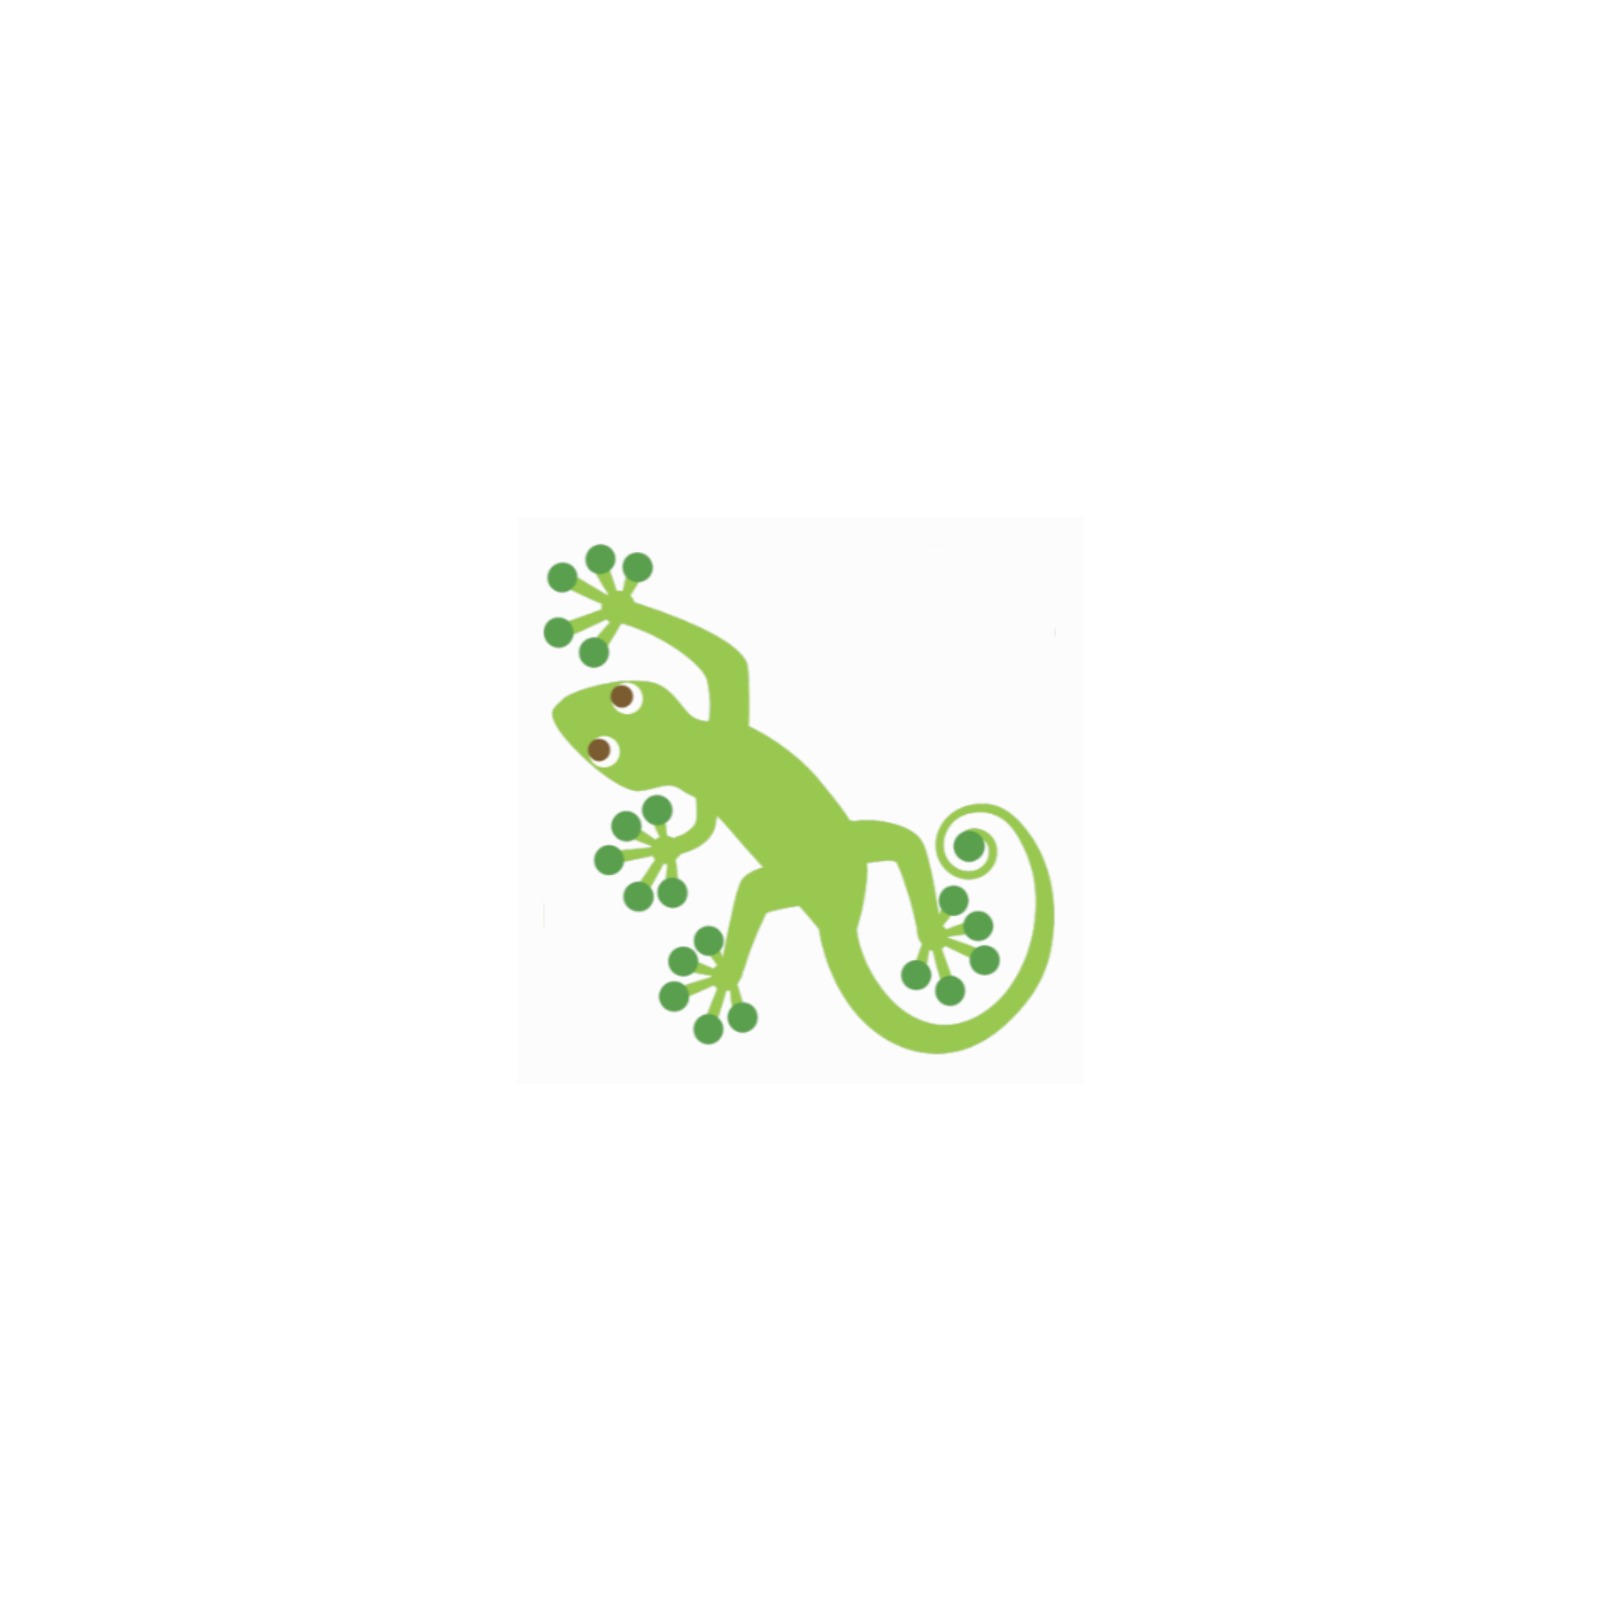 Lizard - Gecko - Great gift for kids Personalized Temporary Tattoo (15 Pieces)